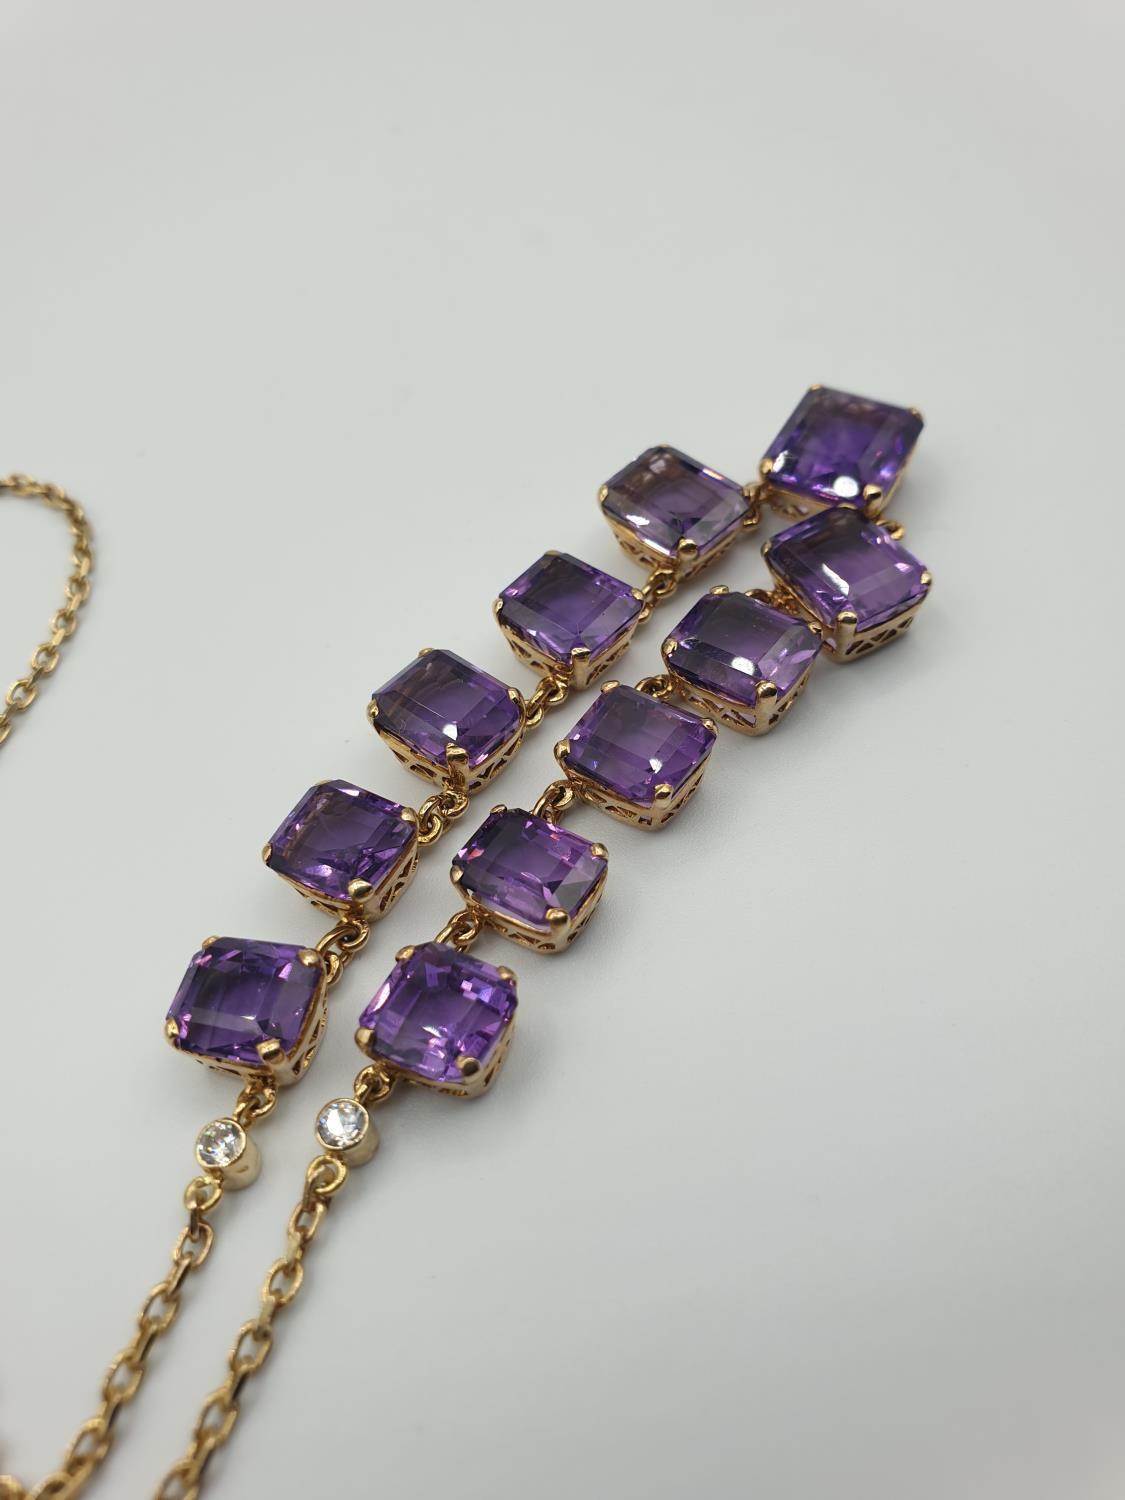 9CT YELLOW GOLD AMETHYST NECKLACE, Size of the biggest stone is 11 x 9mm .WEIGHT 15.8G AND 40CM - Image 4 of 5